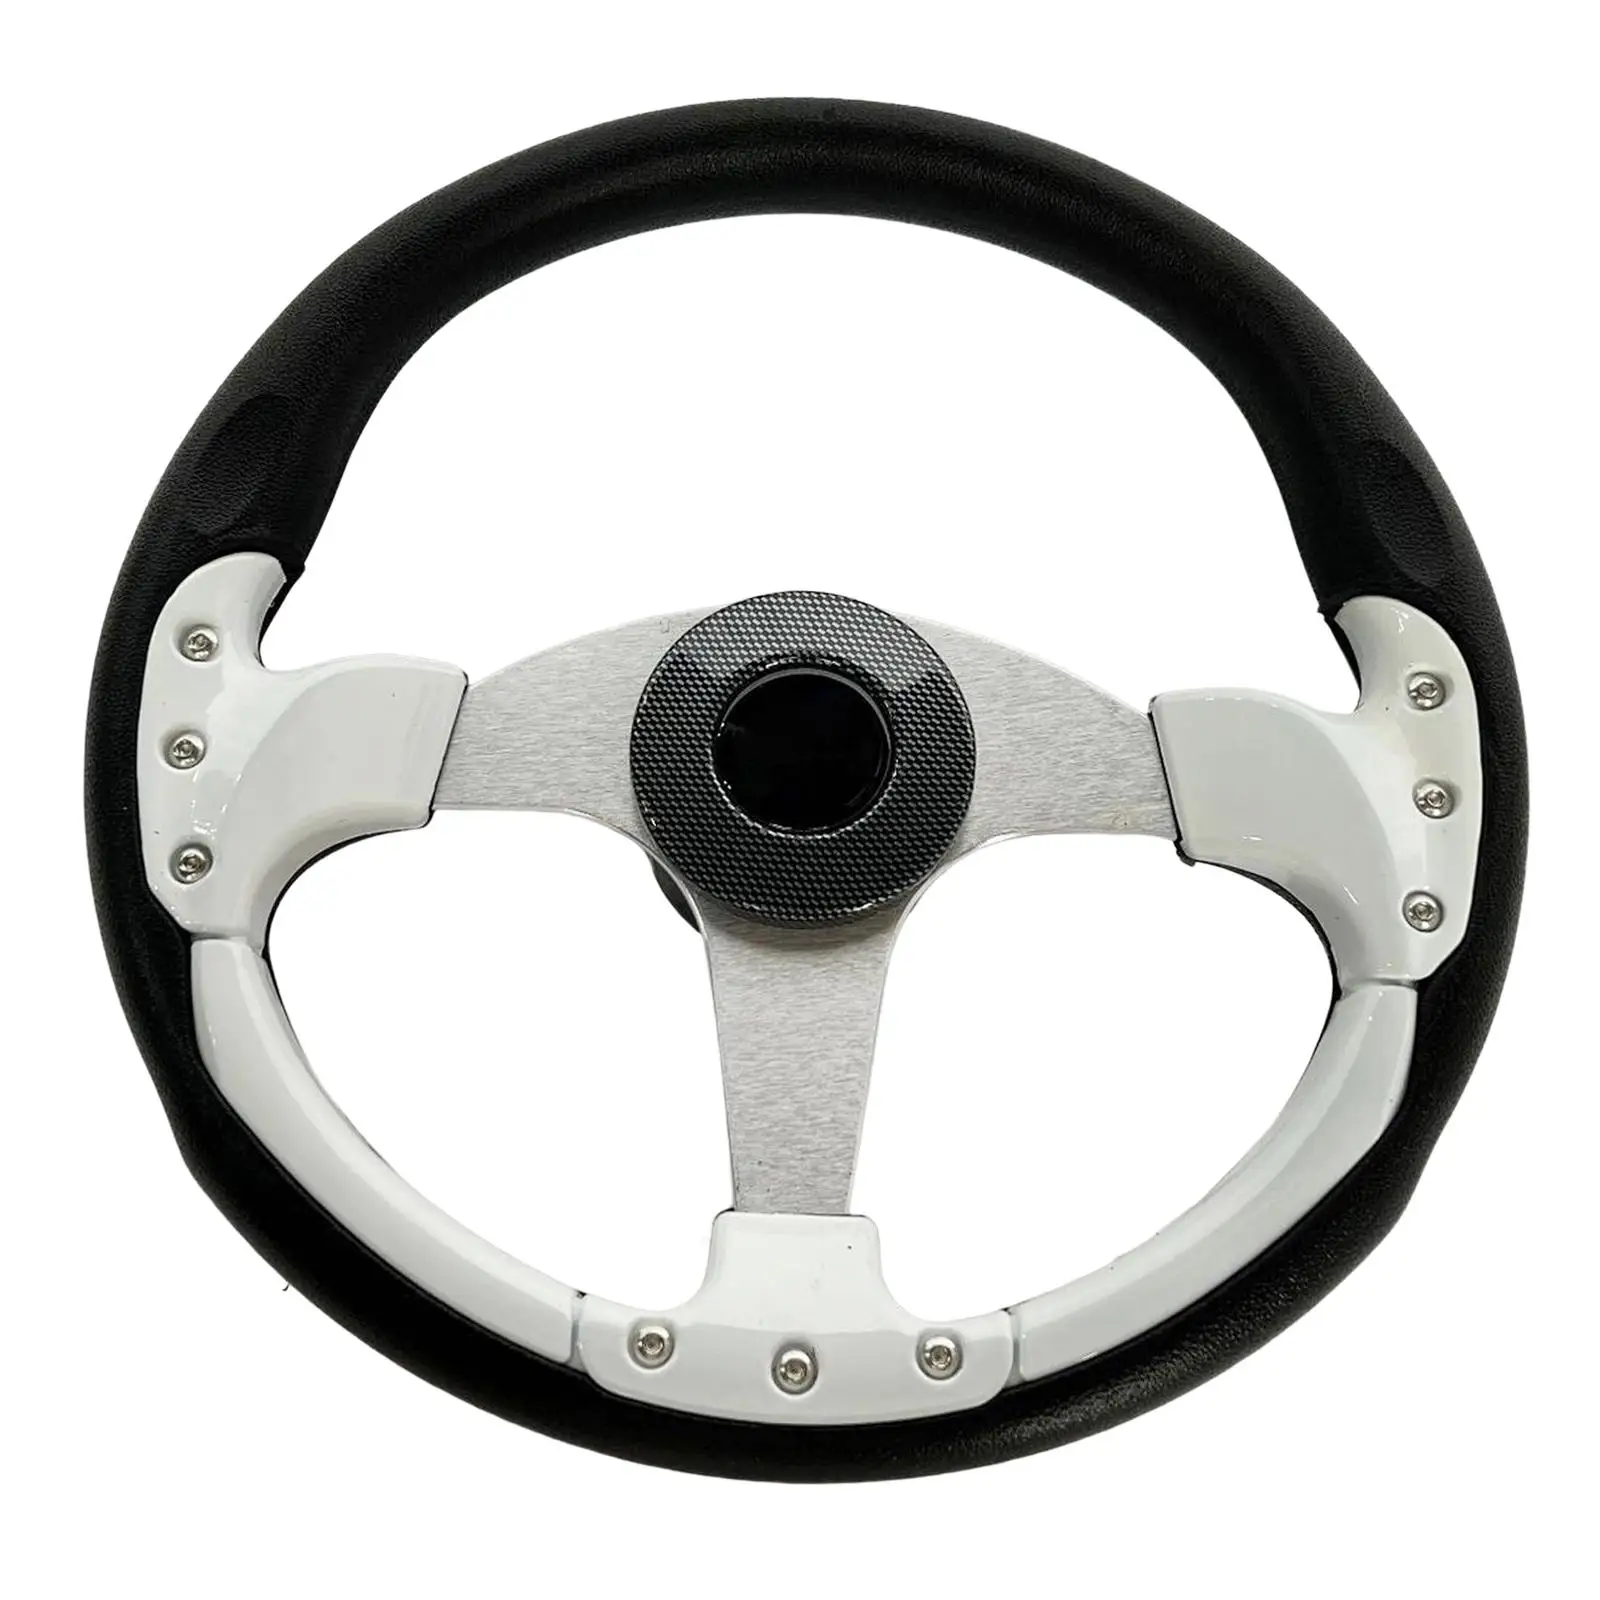 3 Spoke 350mm Boat Steering Wheel Replacement Nonslip for Marine Boats